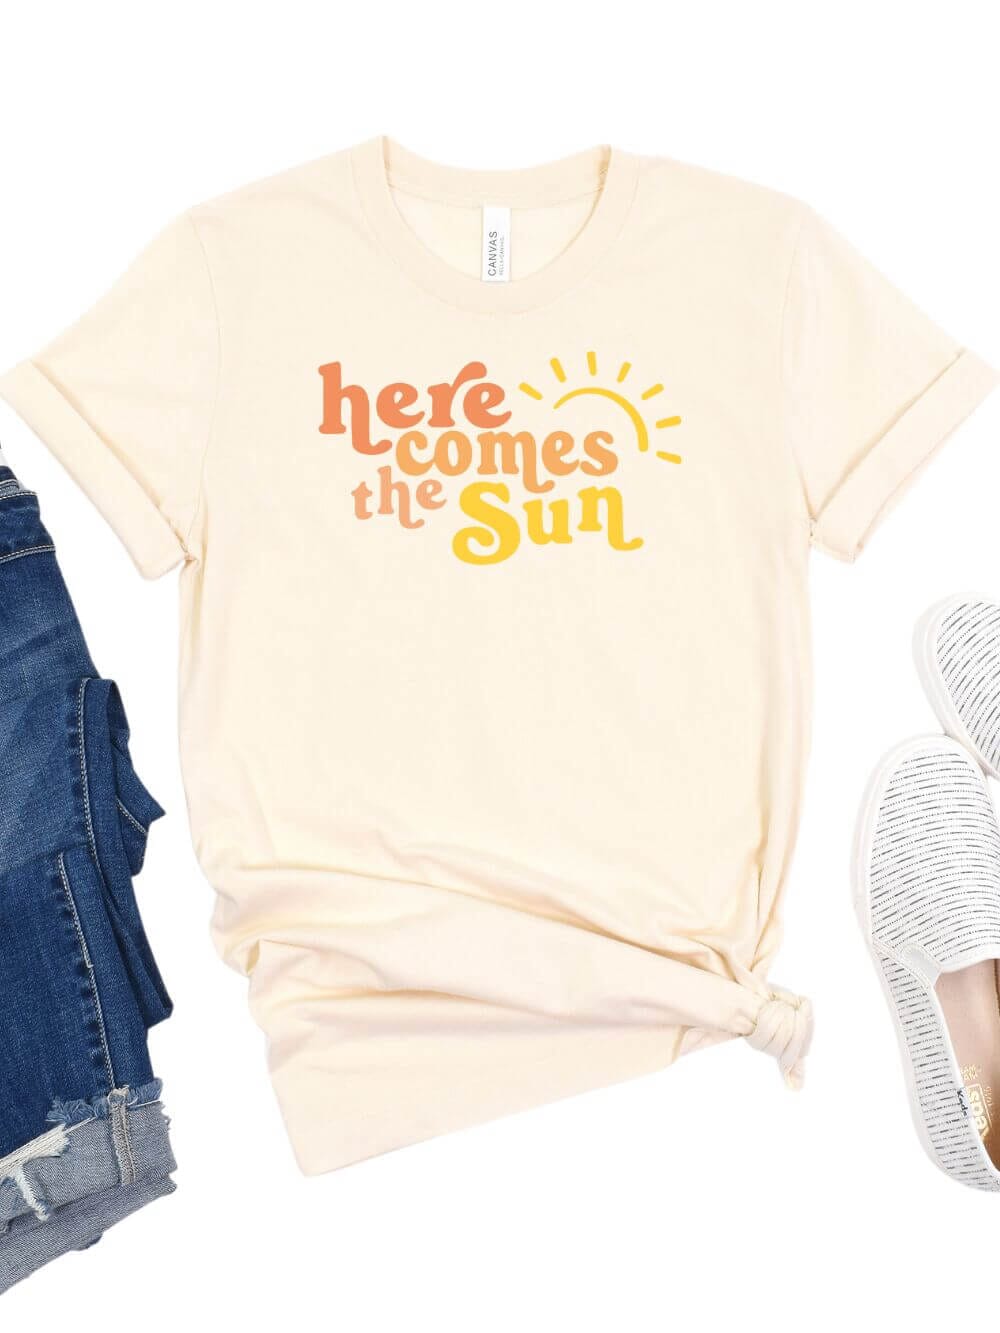 Here Comes the Sun Women's Jersey Short Sleeve Graphic Tee - Sydney So Sweet